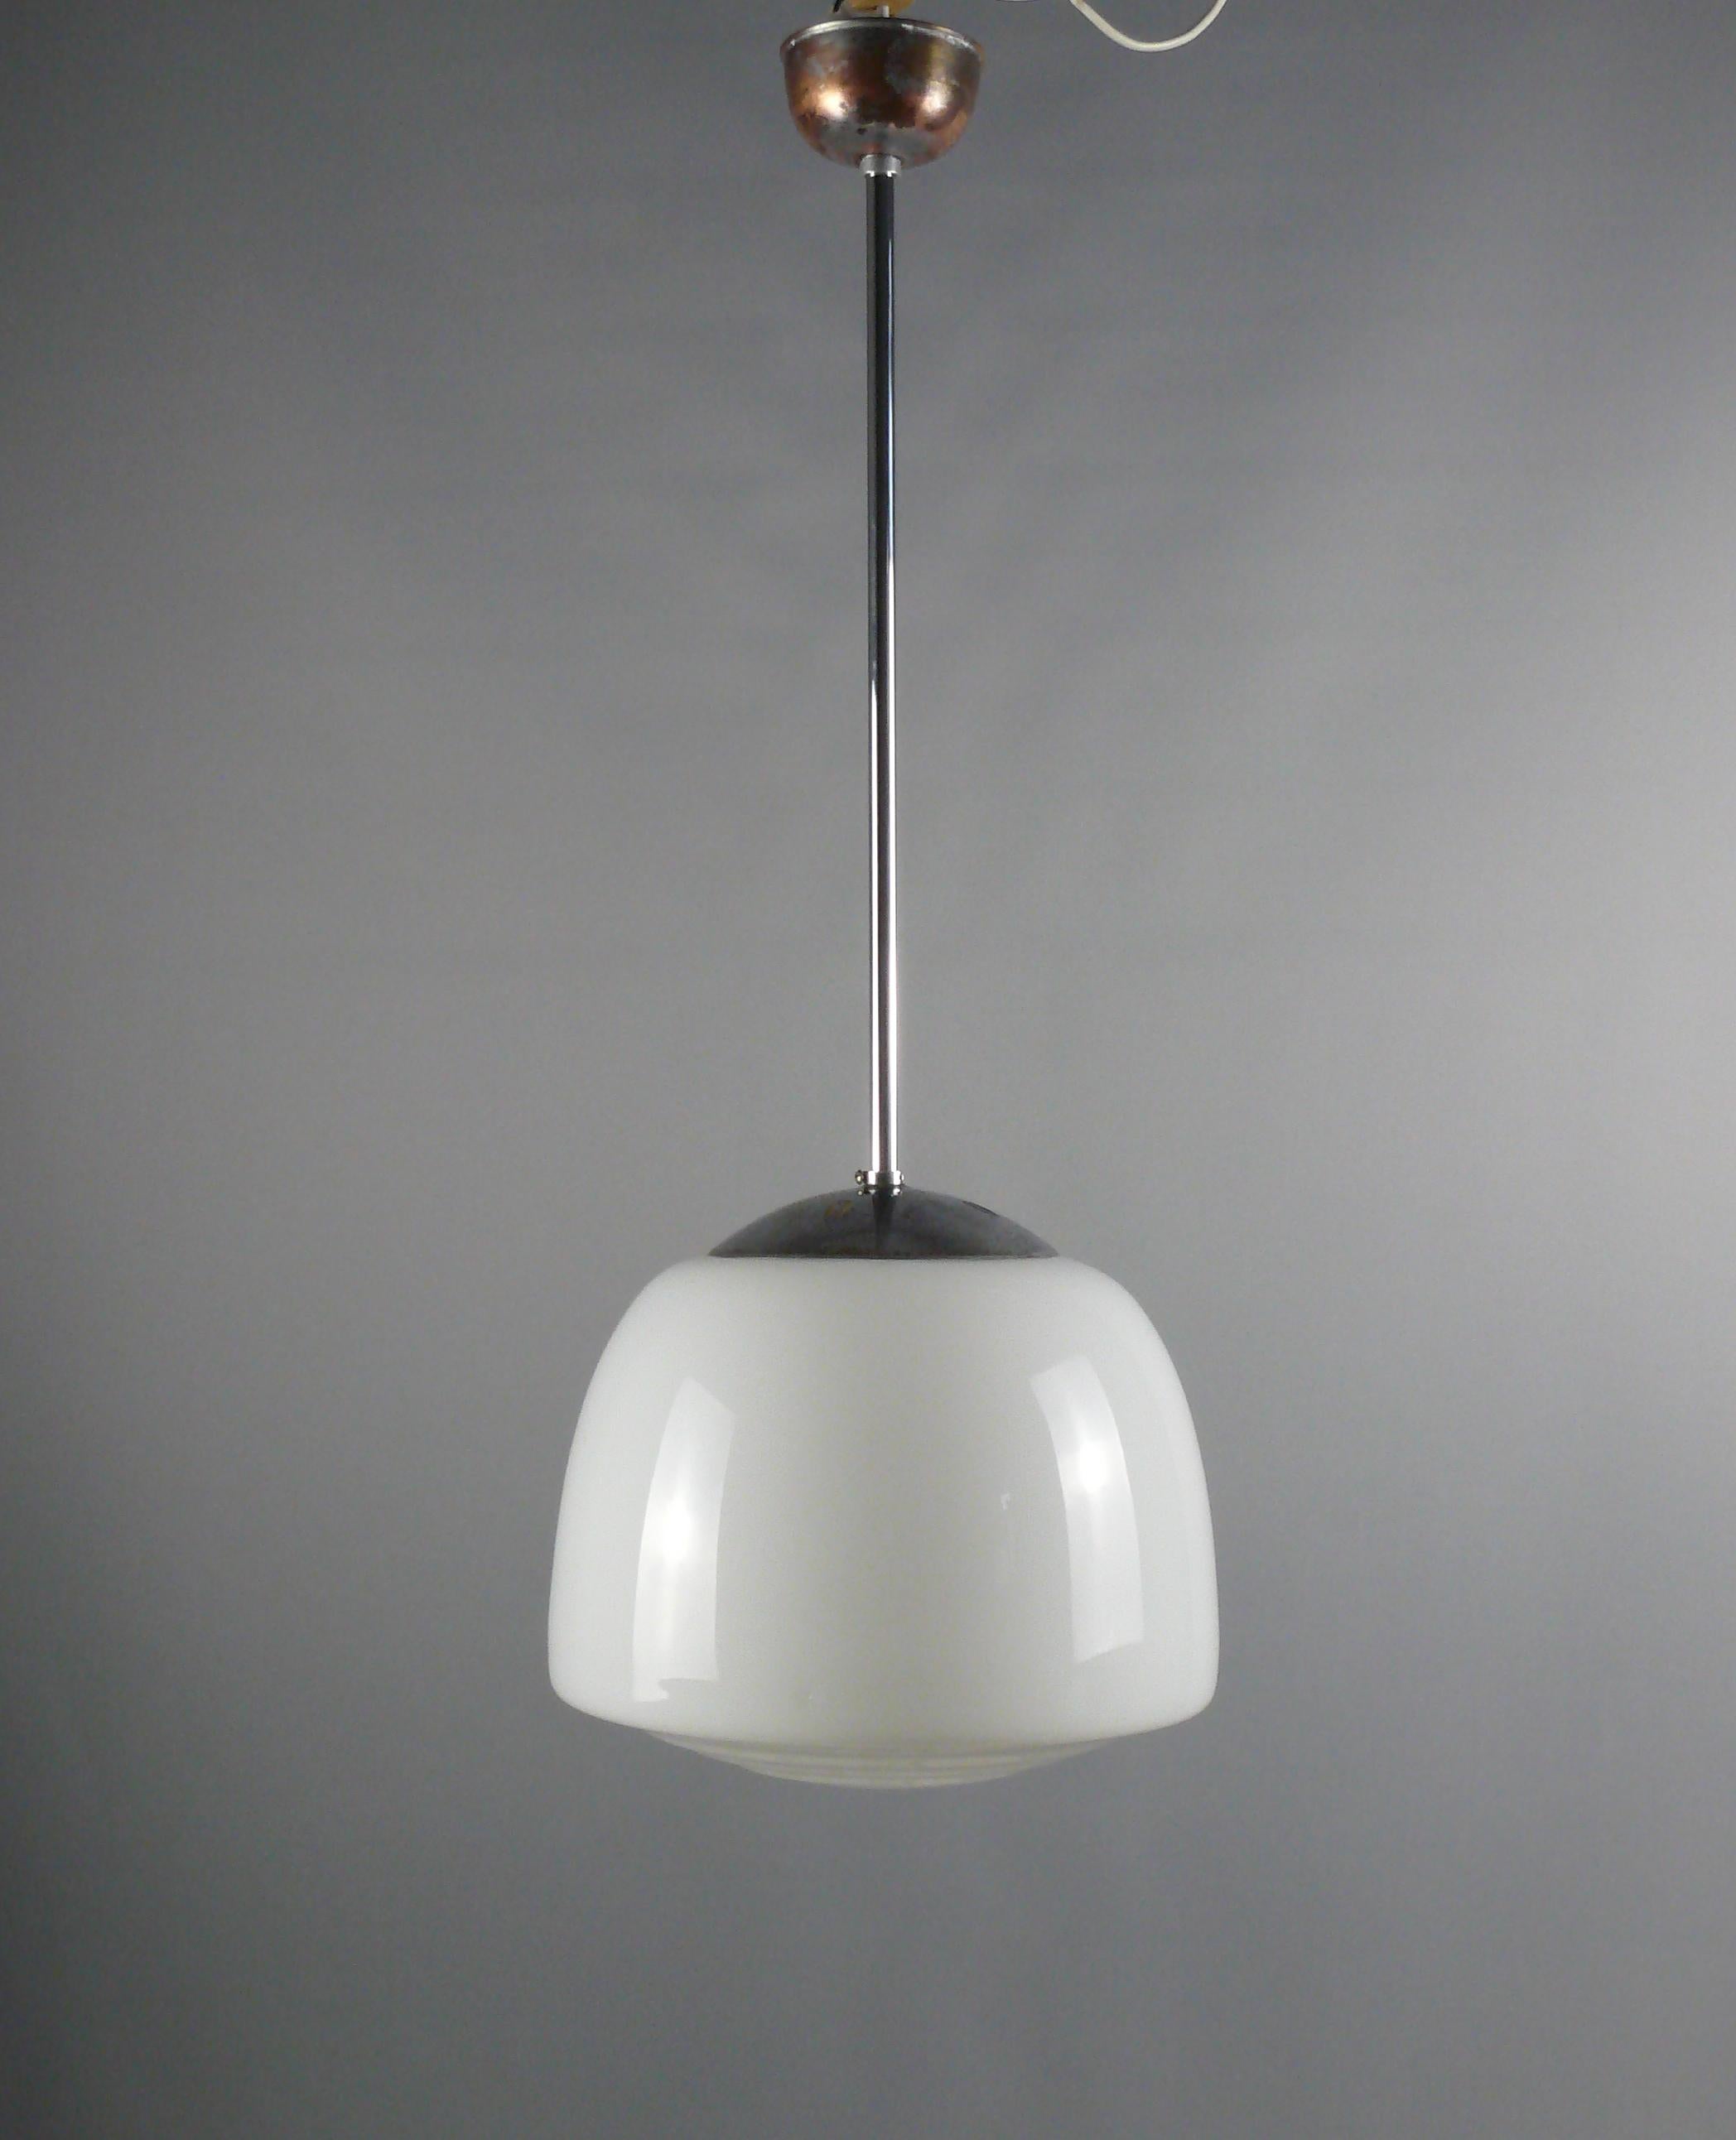 Elegant Bauhaus pendant lights with chrome-plated suspension and stepped, trapezoidal opal glass lampshade. The lamp dates from the first half of the 20th century. The opal glass shade is in good condition. Rod, socket and electrics renewed*. Canopy